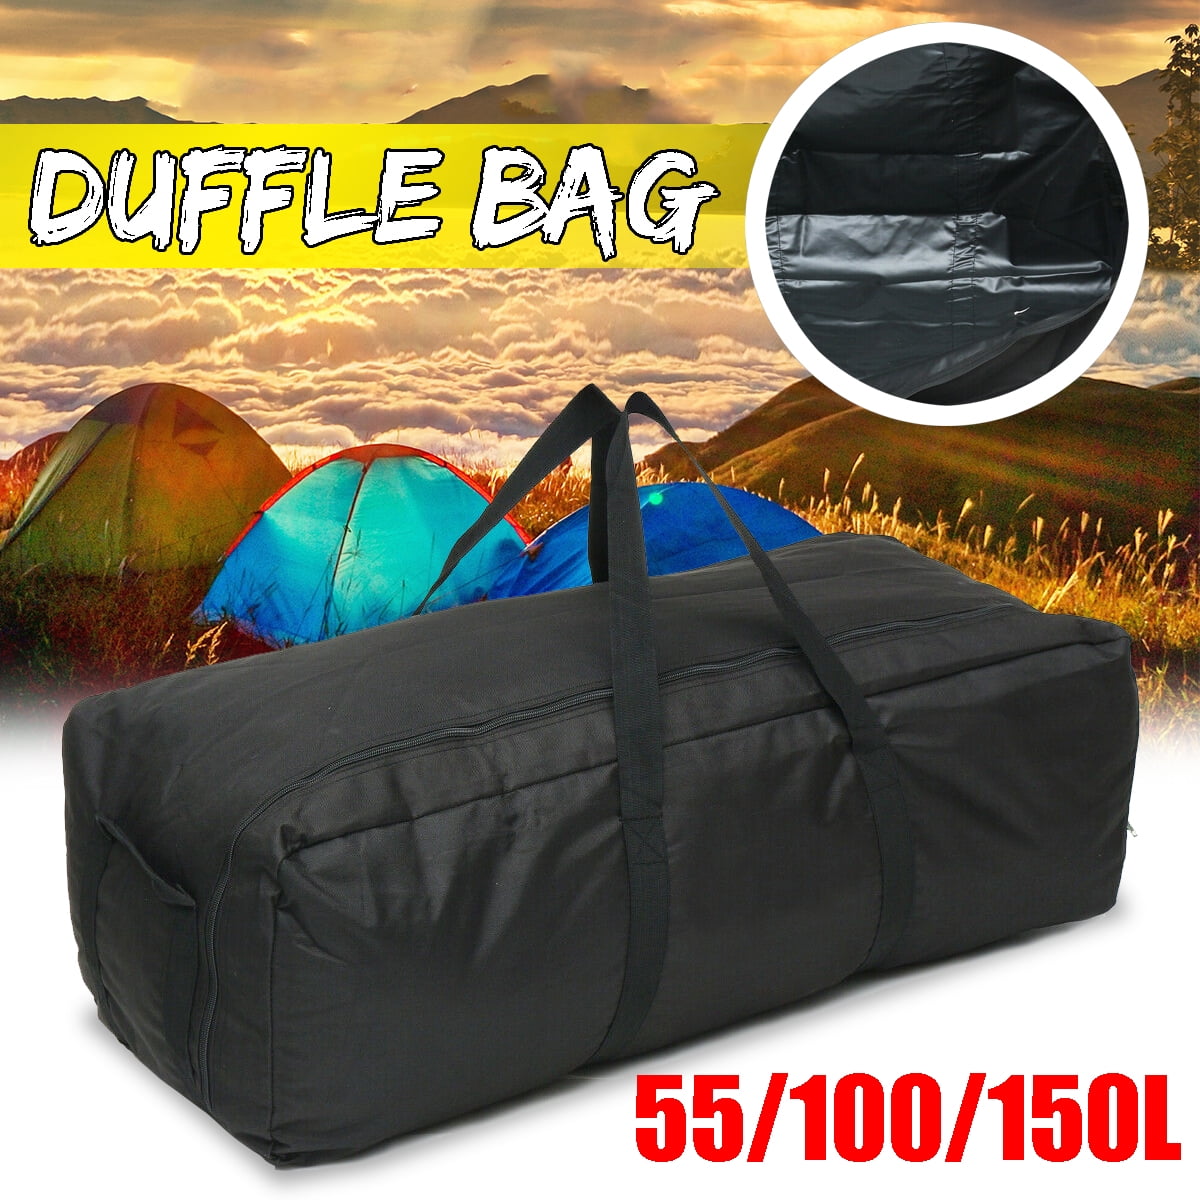 150L Lightweight Foldable Bag for Luggage Gym Sports Camping Travelling Cycling Storage Shopping 55L Azarxis Large Travel Luggage Duffel Bag Black, M - 100L 100L 